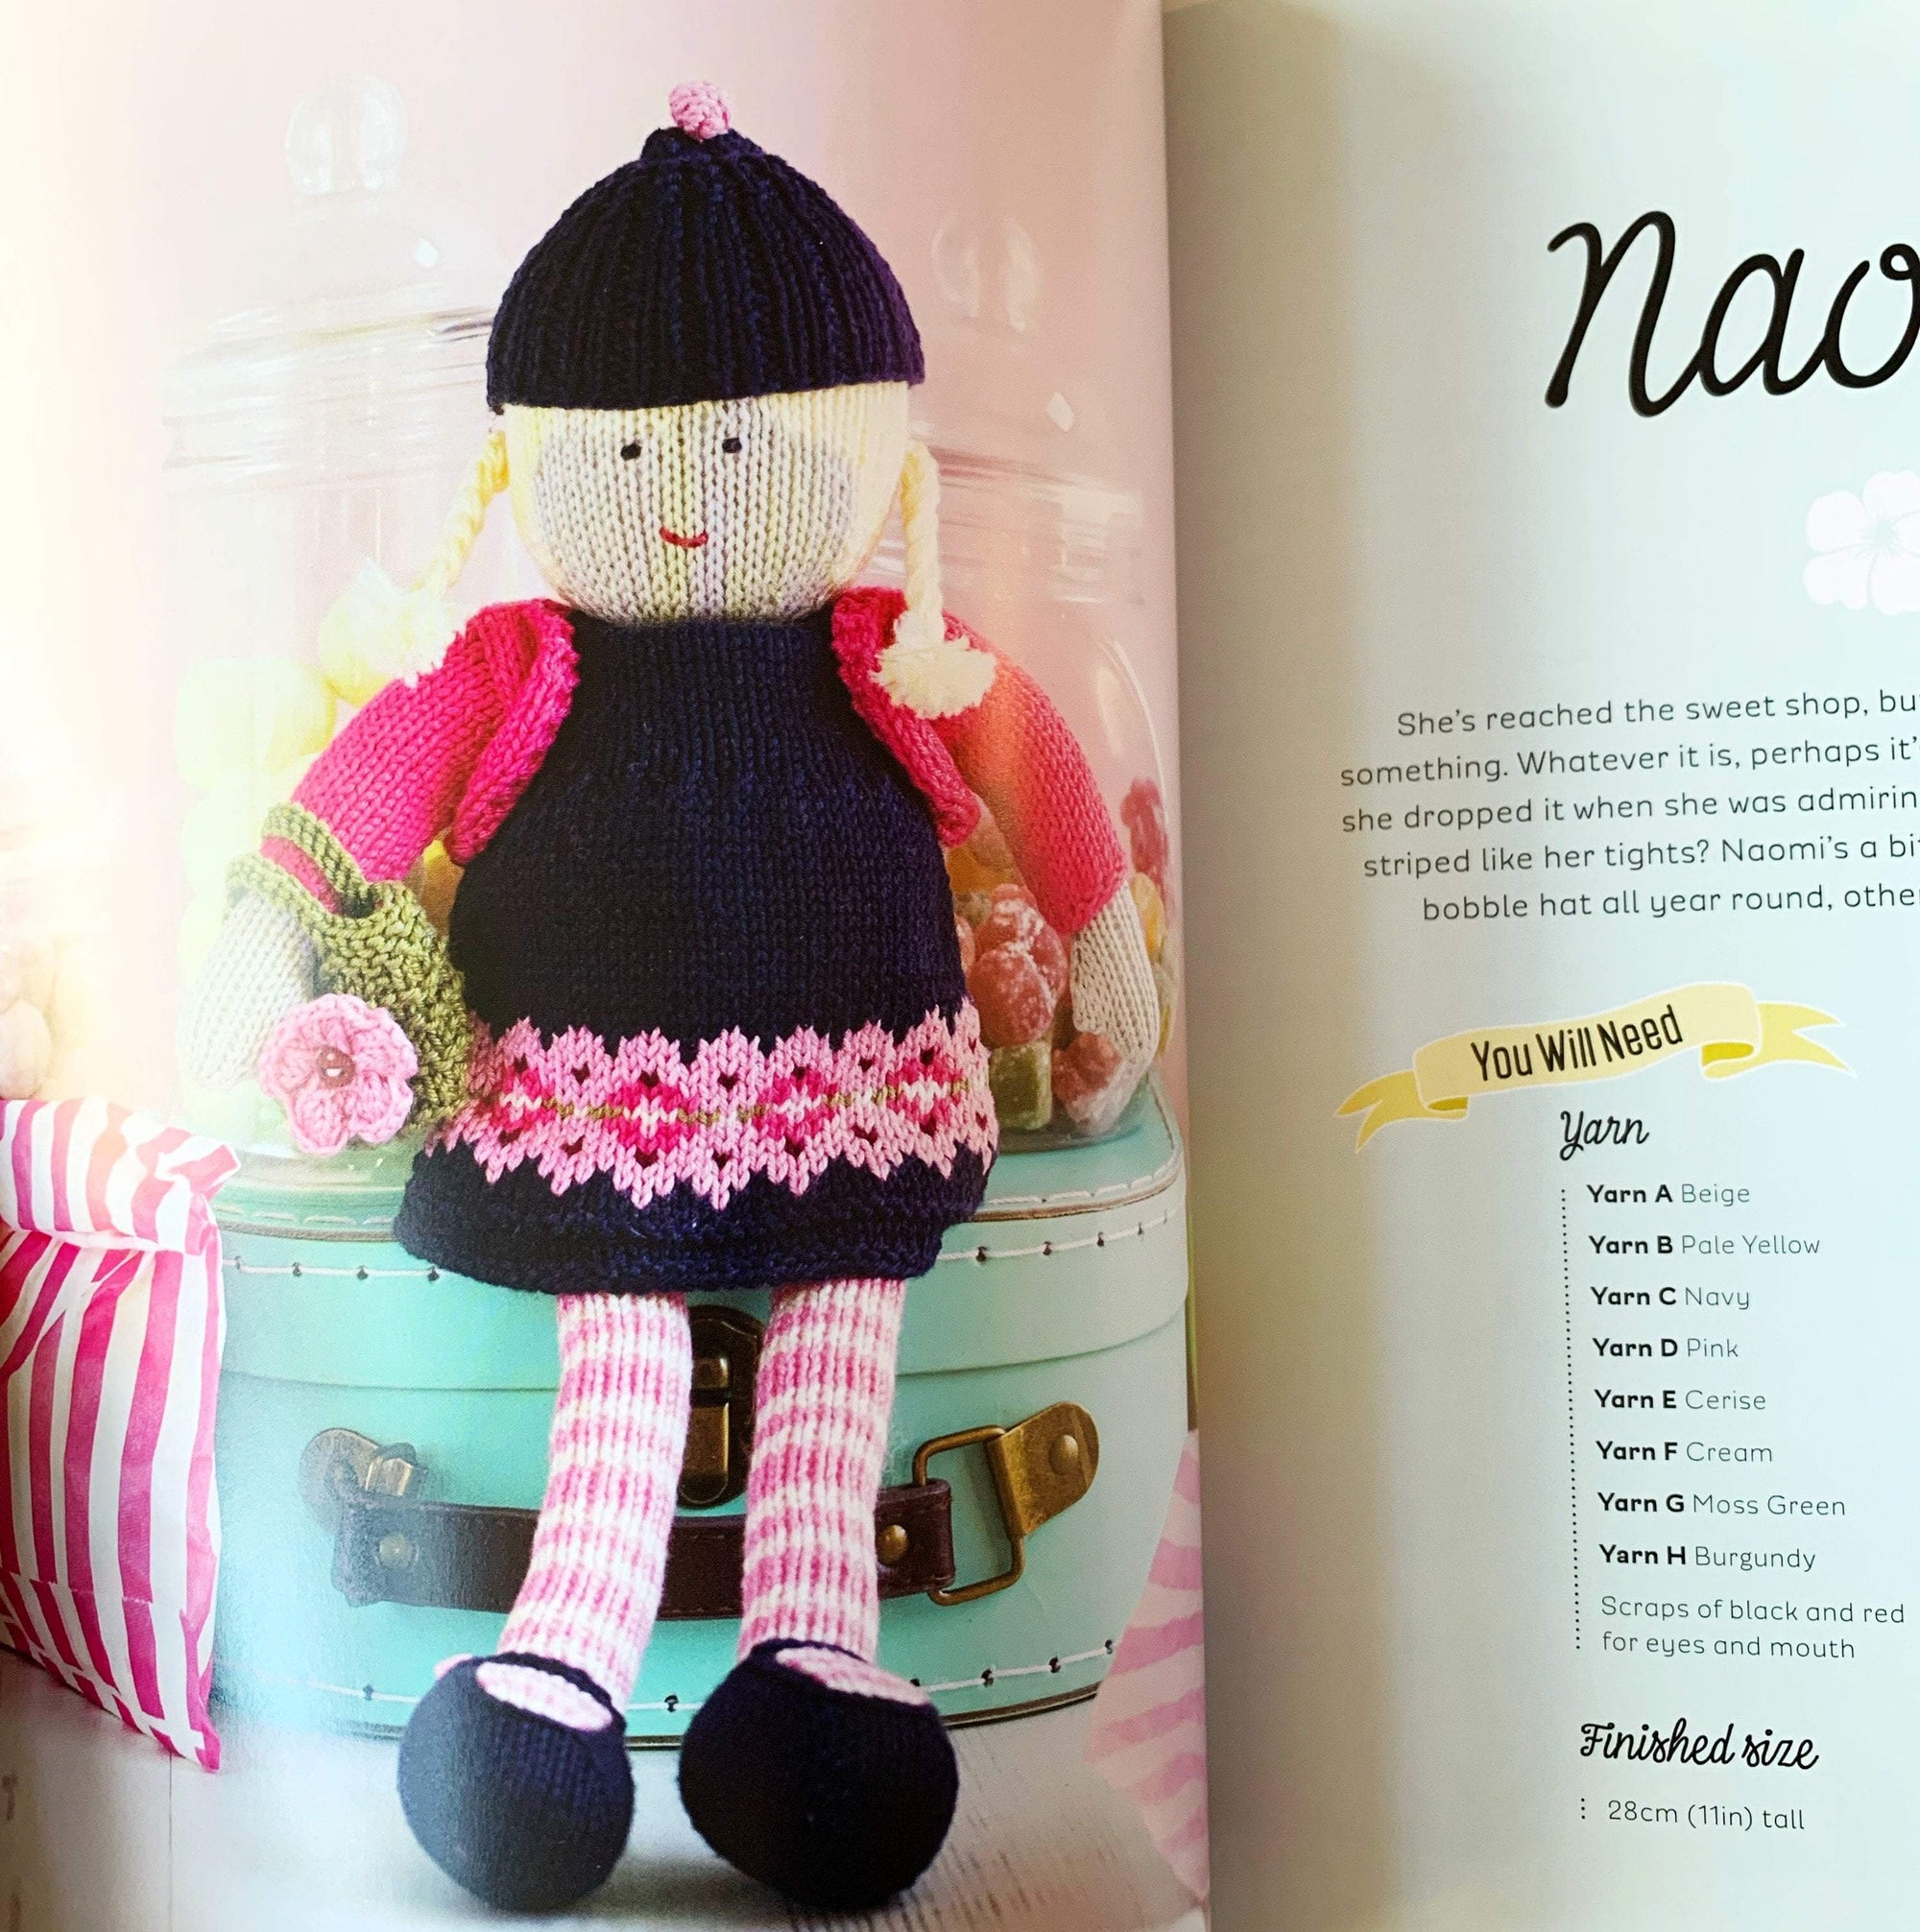 my knitted doll louise crowther